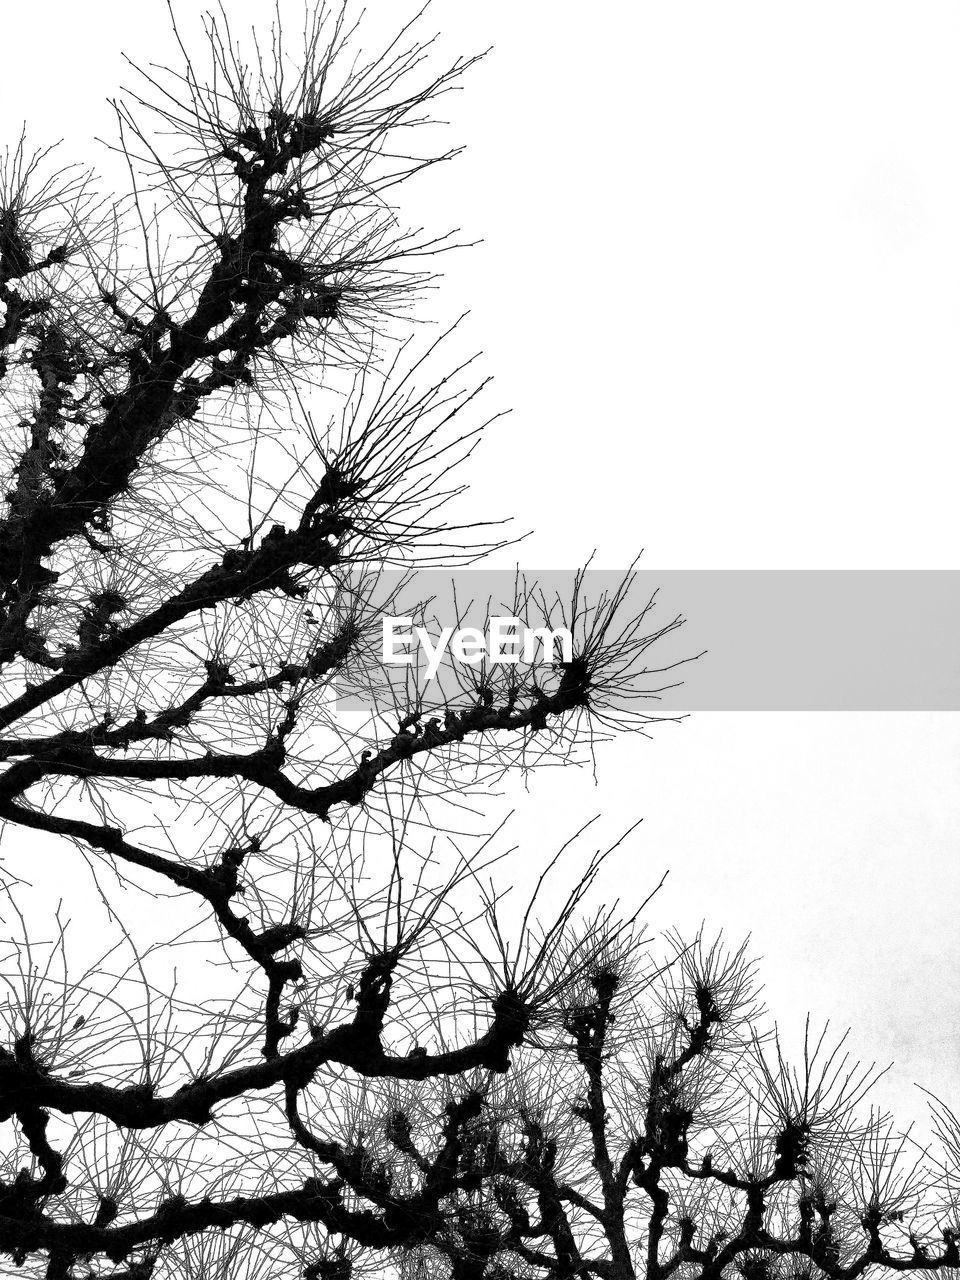 CLOSE-UP OF TREE AGAINST CLEAR SKY